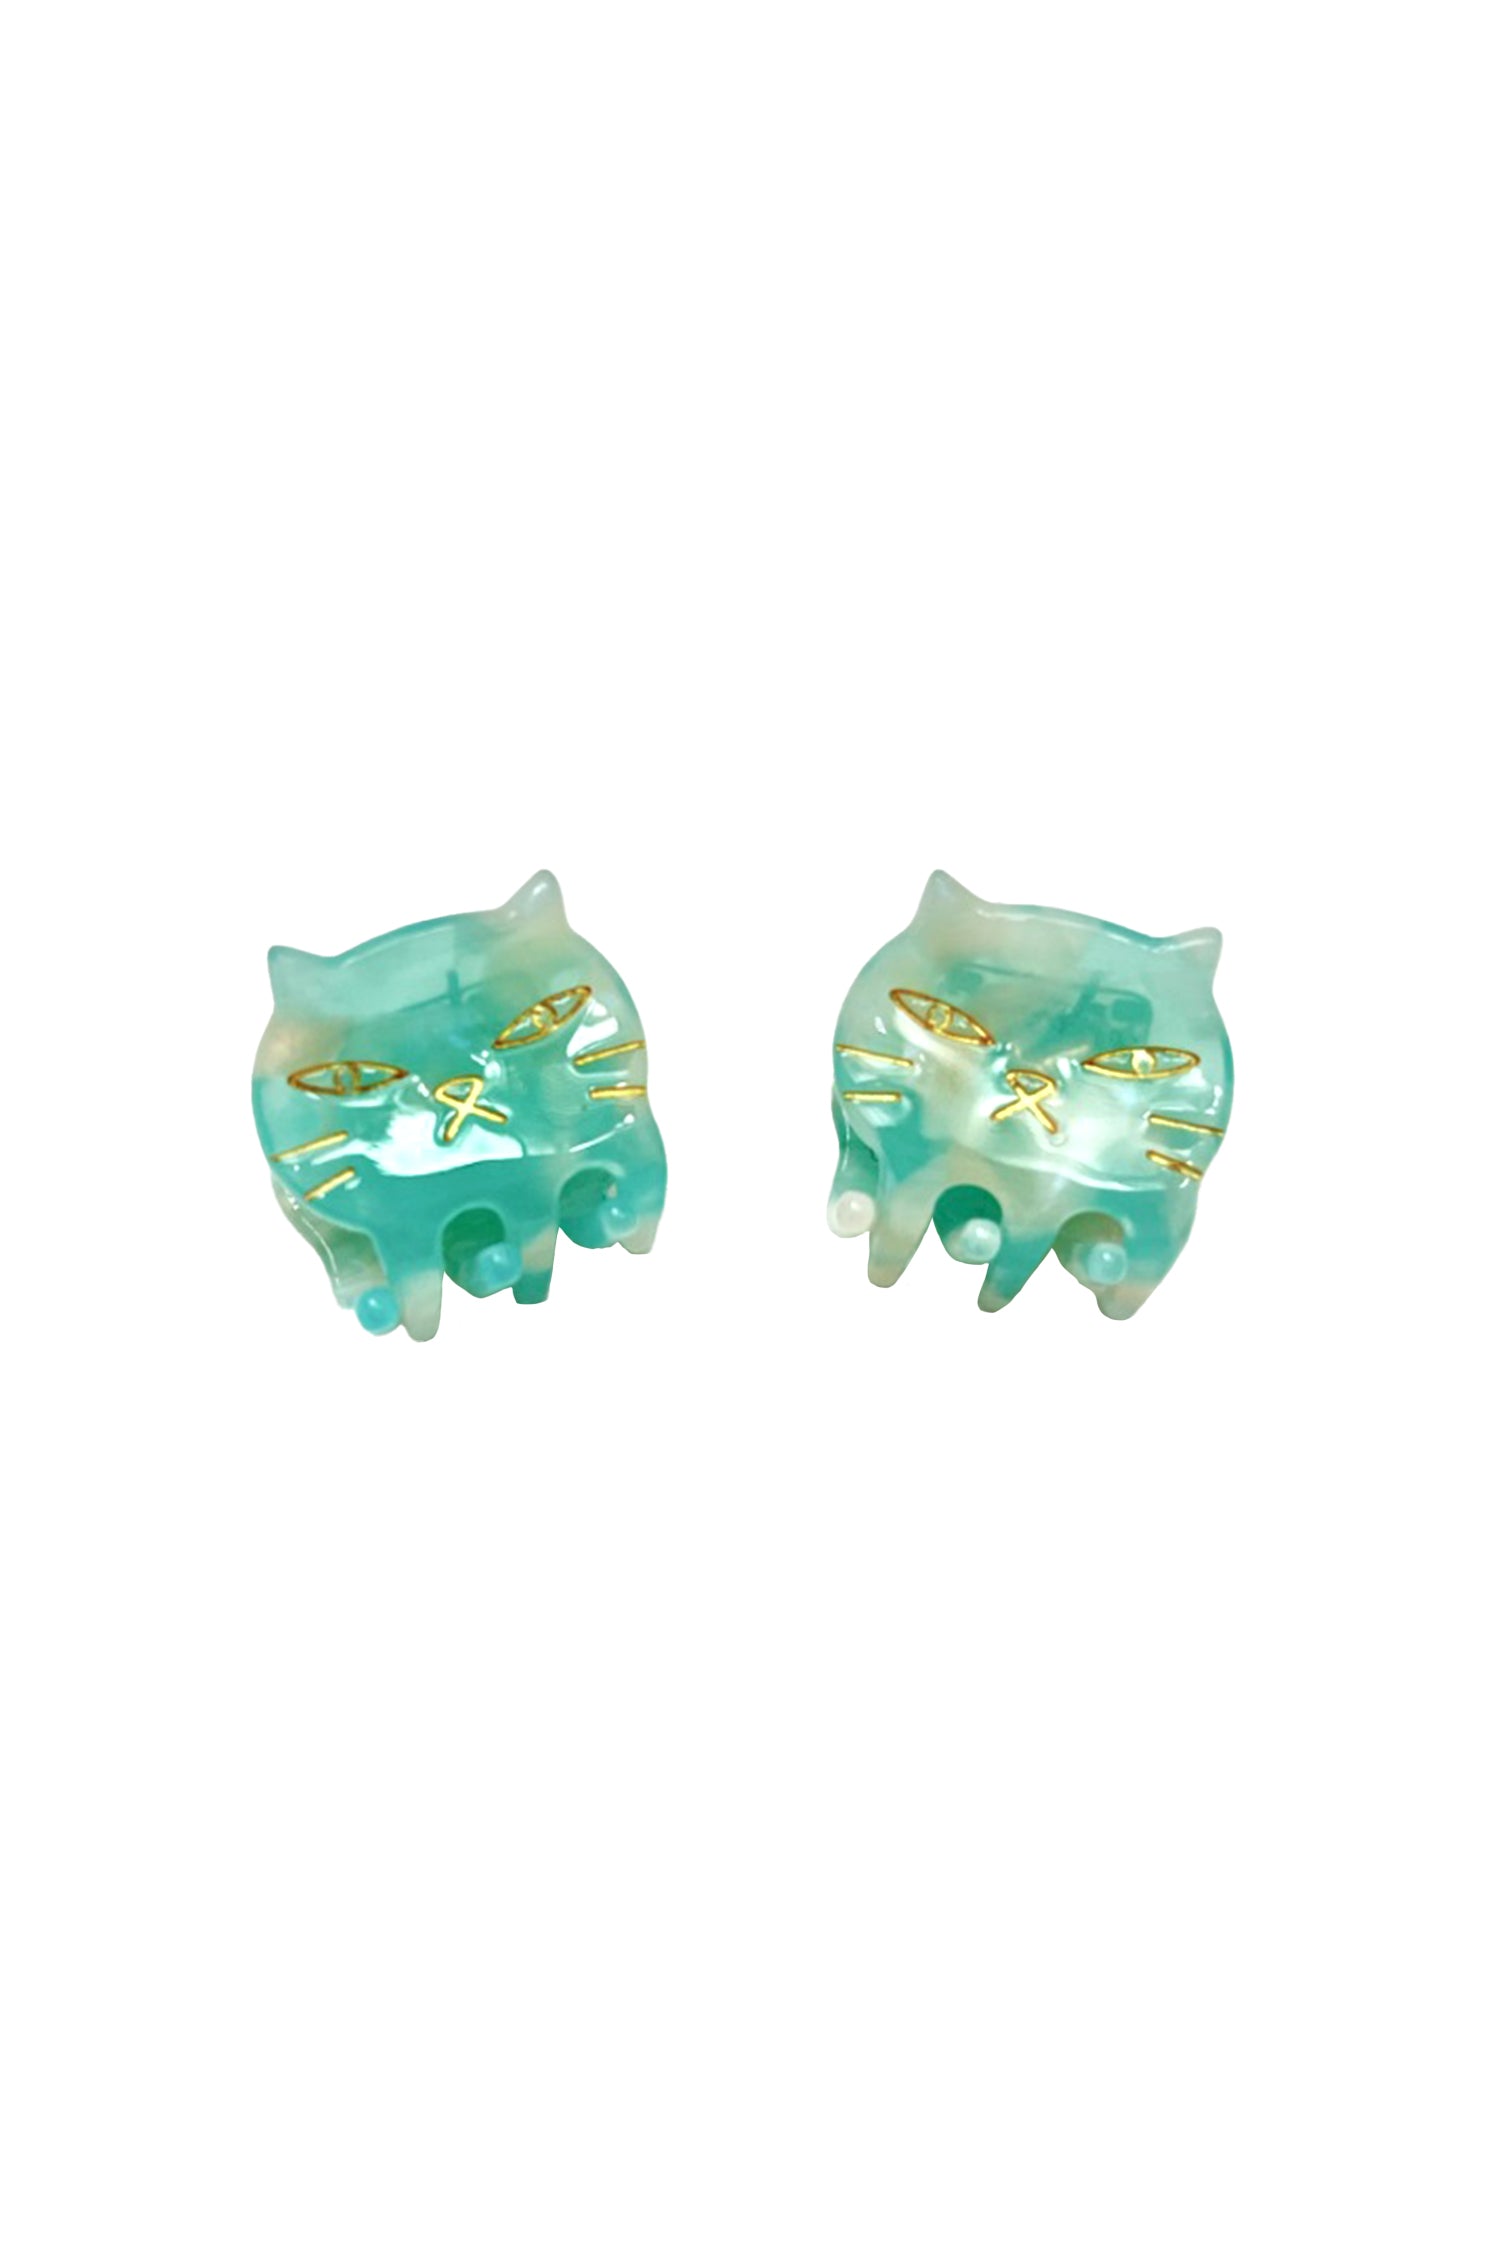 Pastel Meow Cat Jaw Clip Pair, aqua cat head, golden highlight, cat head used to open the hair jaw  